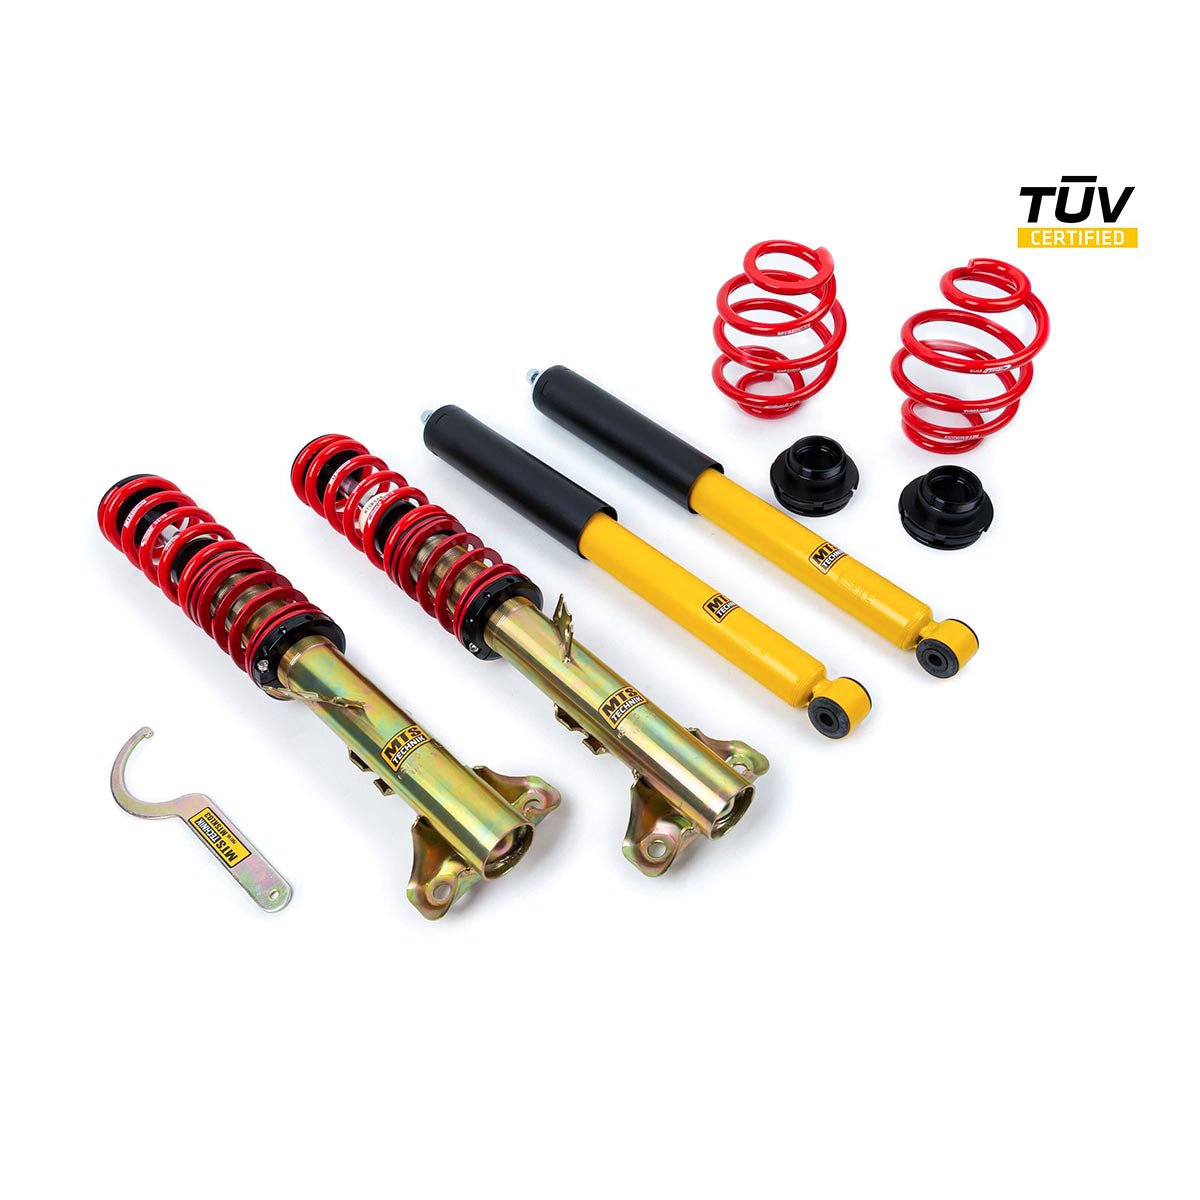 MTS TECHNIK coilover kit STREET BMW Z3 Roadster (with TÜV) - PARTS33 GmbH